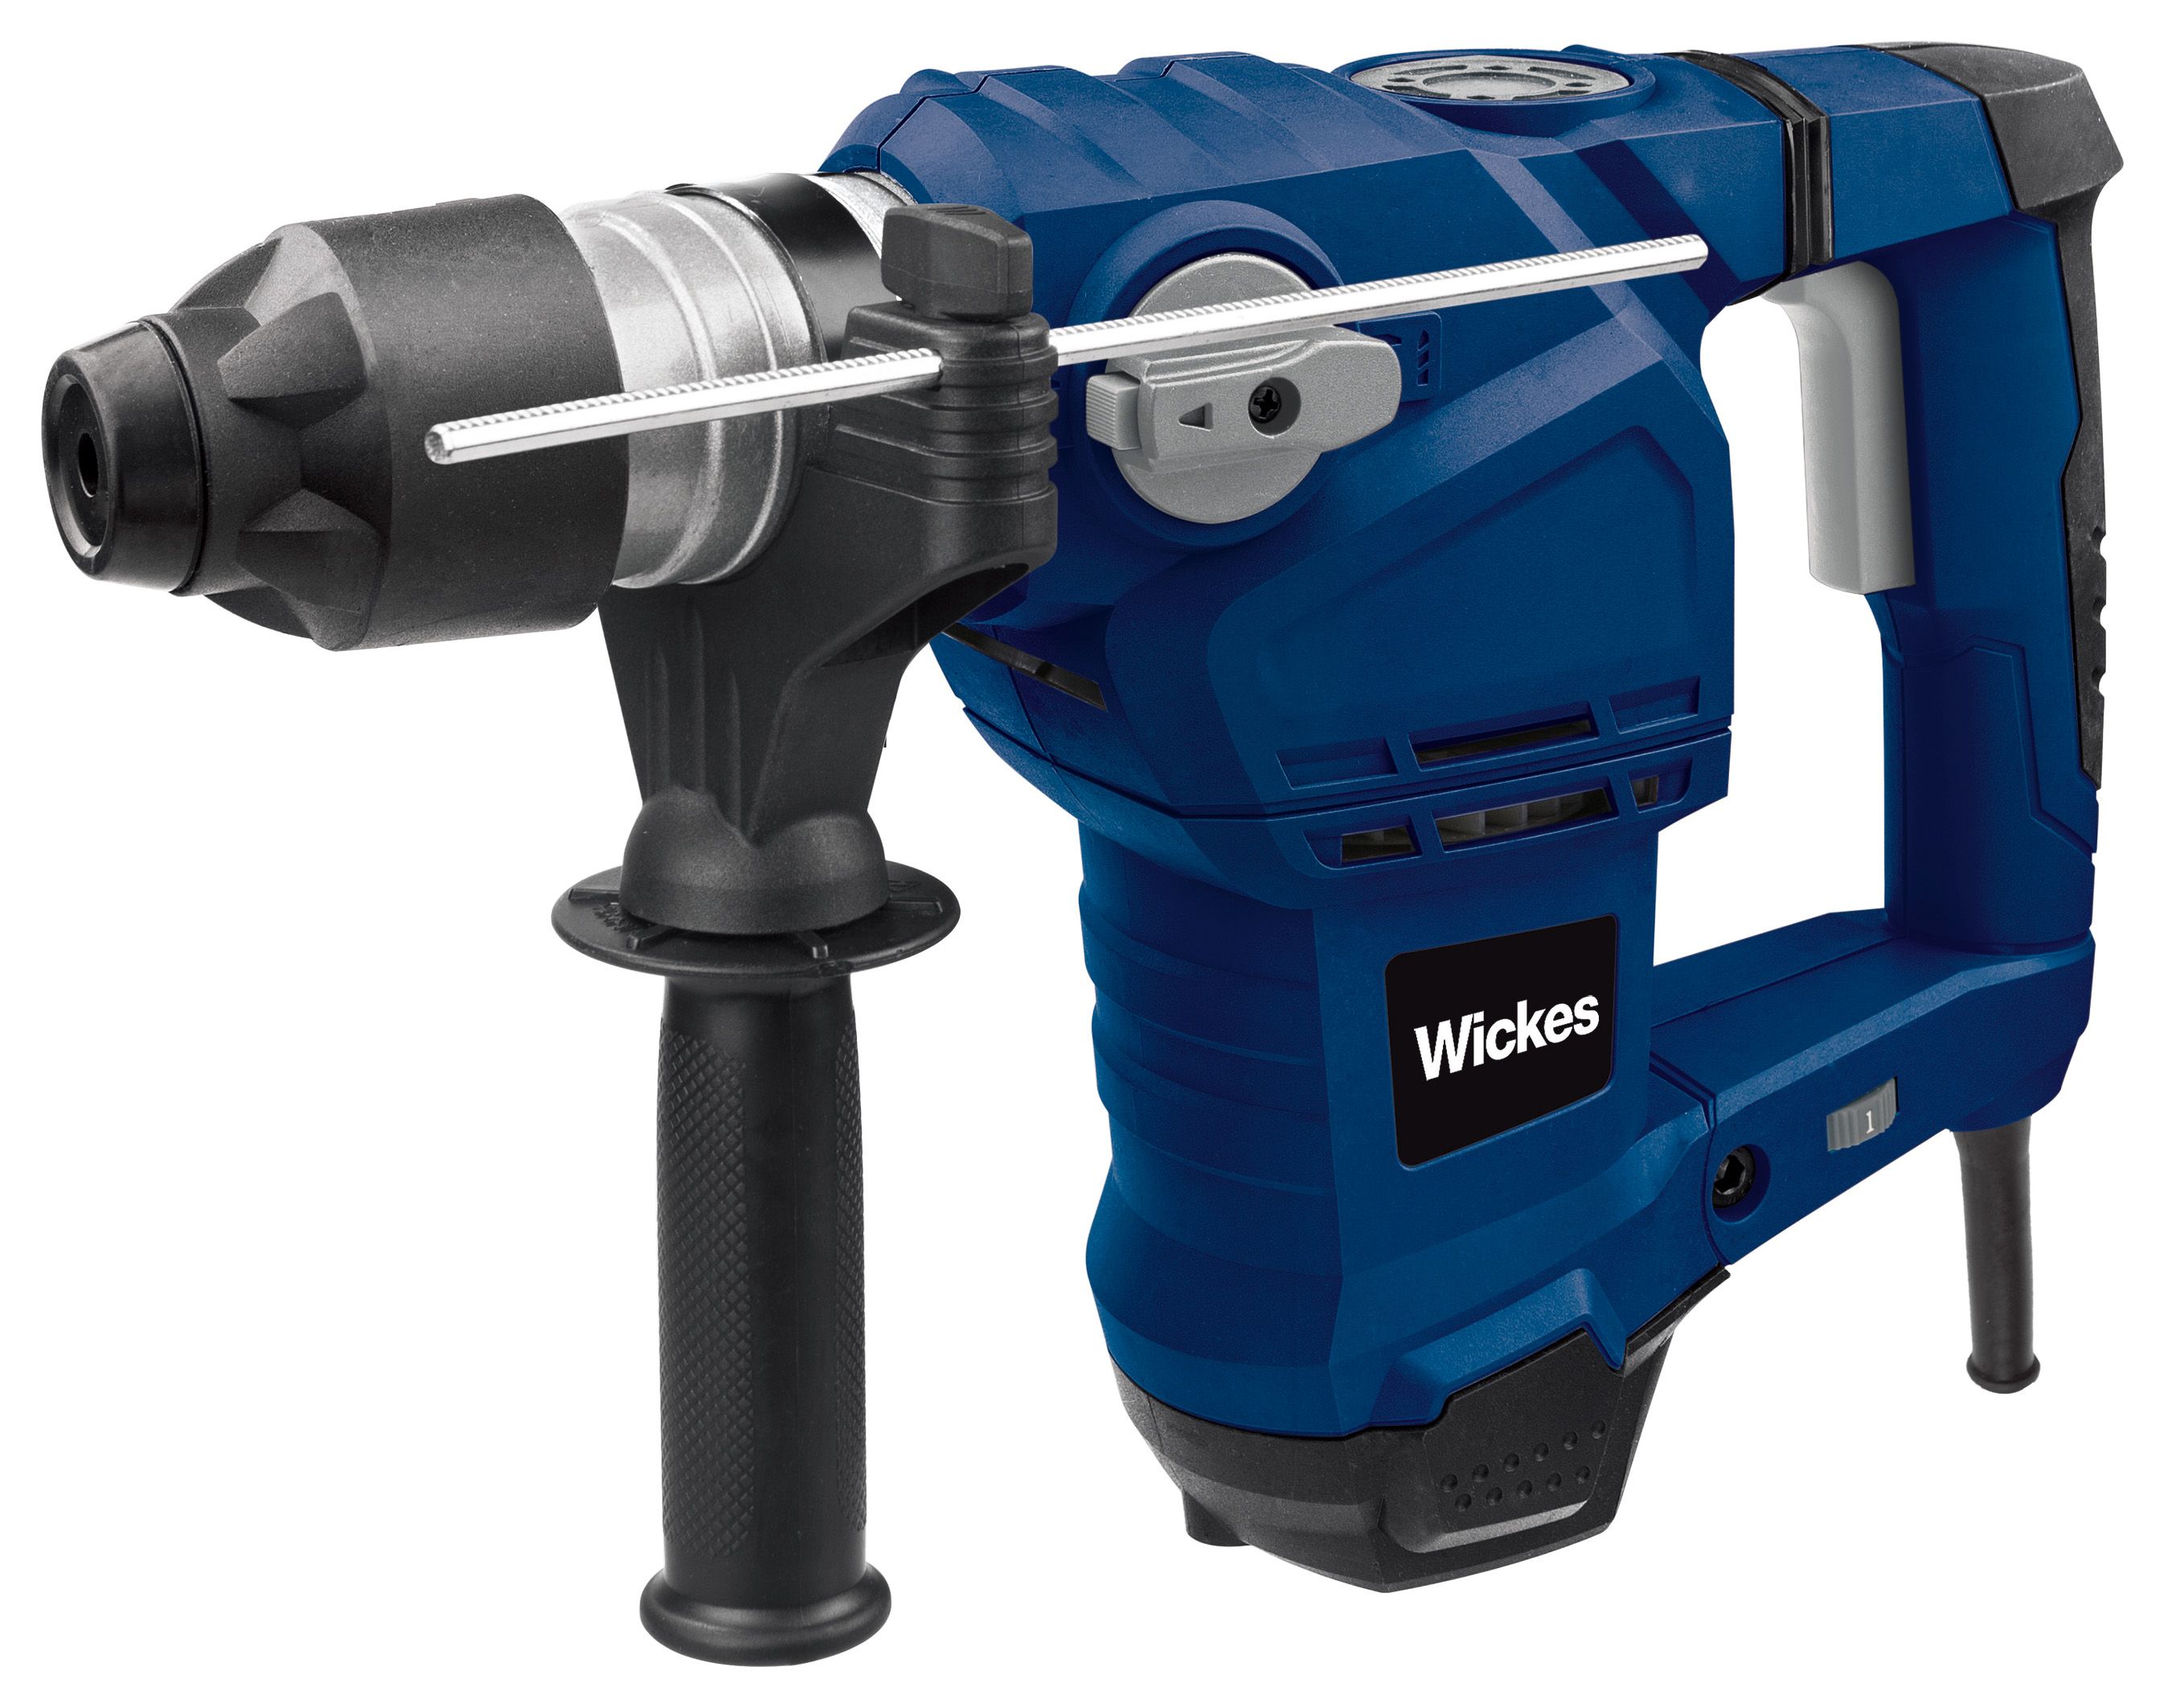 Wickes SDS+ Corded Rotary Hammer Drill - 1500W